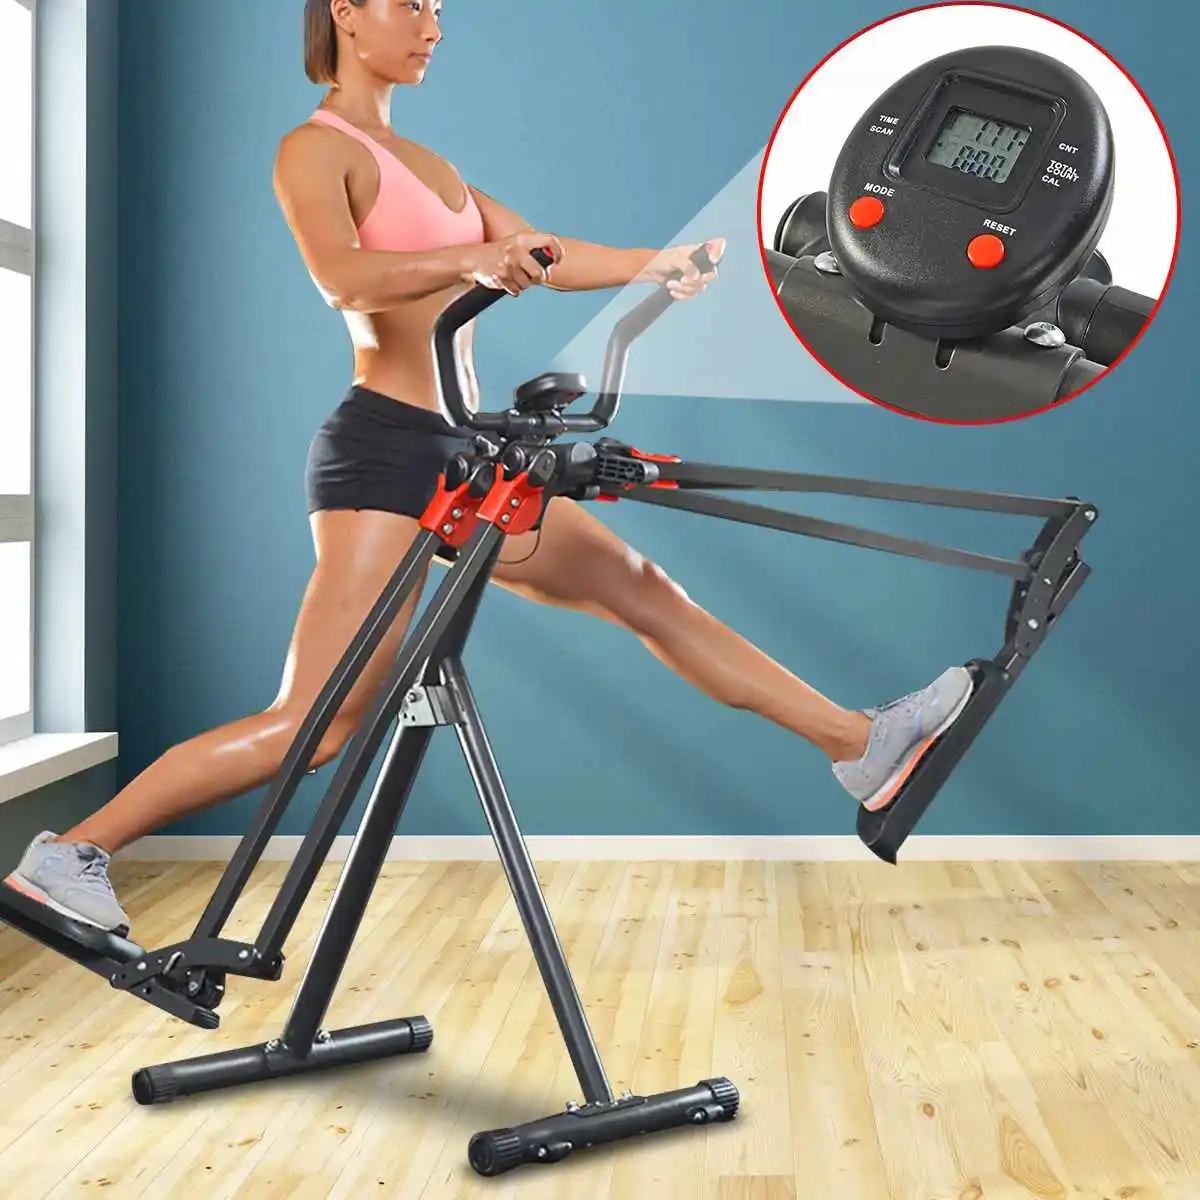 Fitness Exercise Stepper Cardio Machine Indoor Cycling Bikes LCD Display Soft Handle Bar Pedal Bike Home Gym Equipment Airwalker